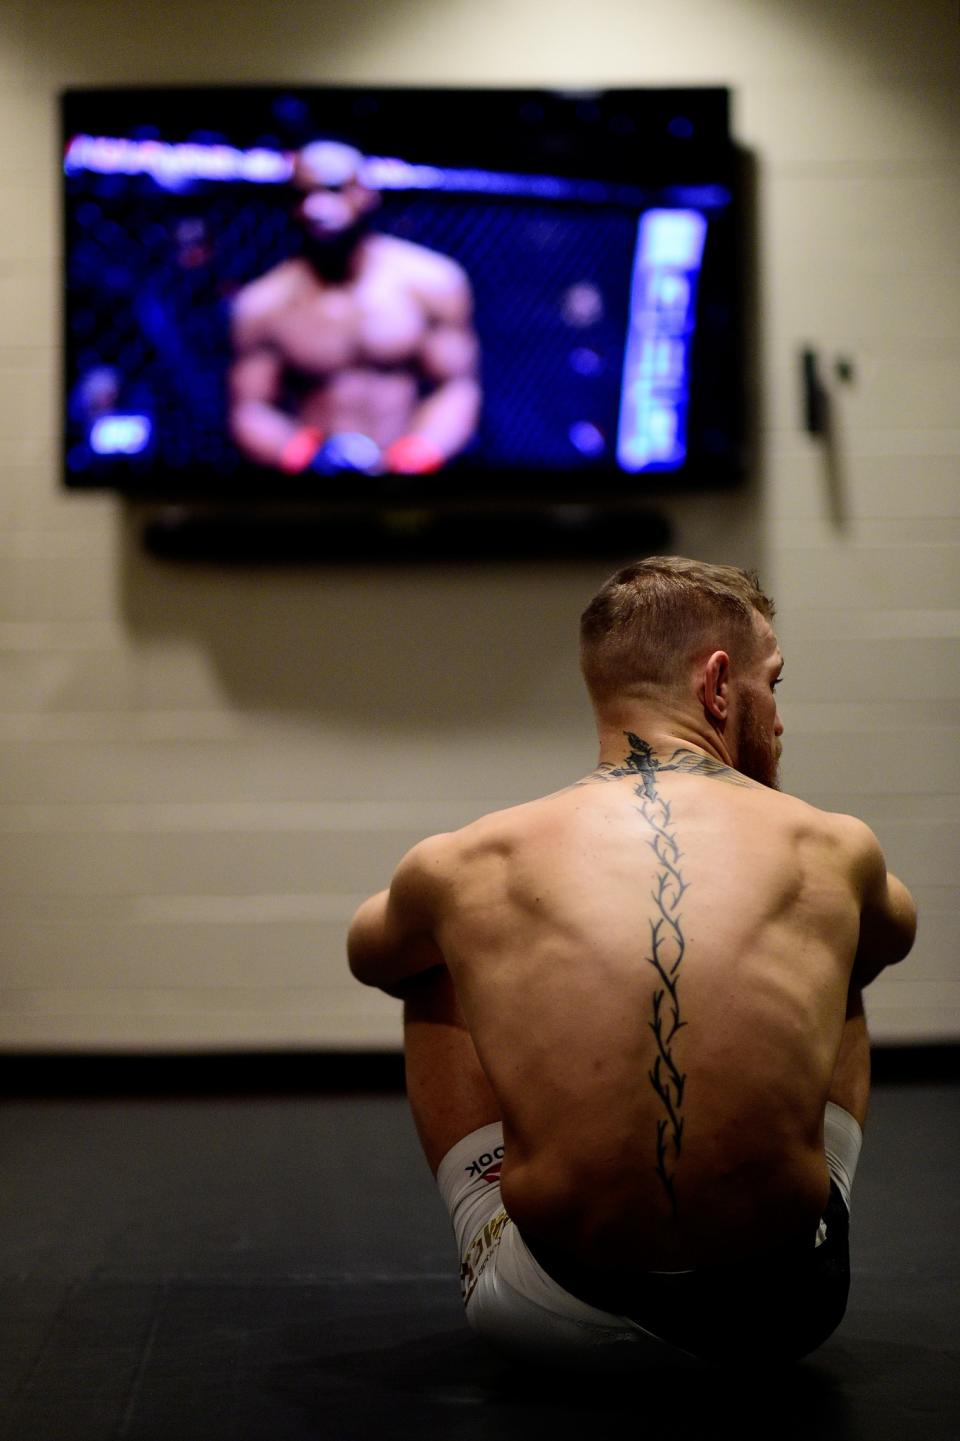 <p>Conor McGregor of Ireland warms up in his locker room prior to his lightweight title fight against Eddie Alvarez during the UFC 205 event at Madison Square Garden on November 12, 2016 in New York City. (Photo by Todd Lussier/Zuffa LLC/Zuffa LLC via Getty Images) </p>